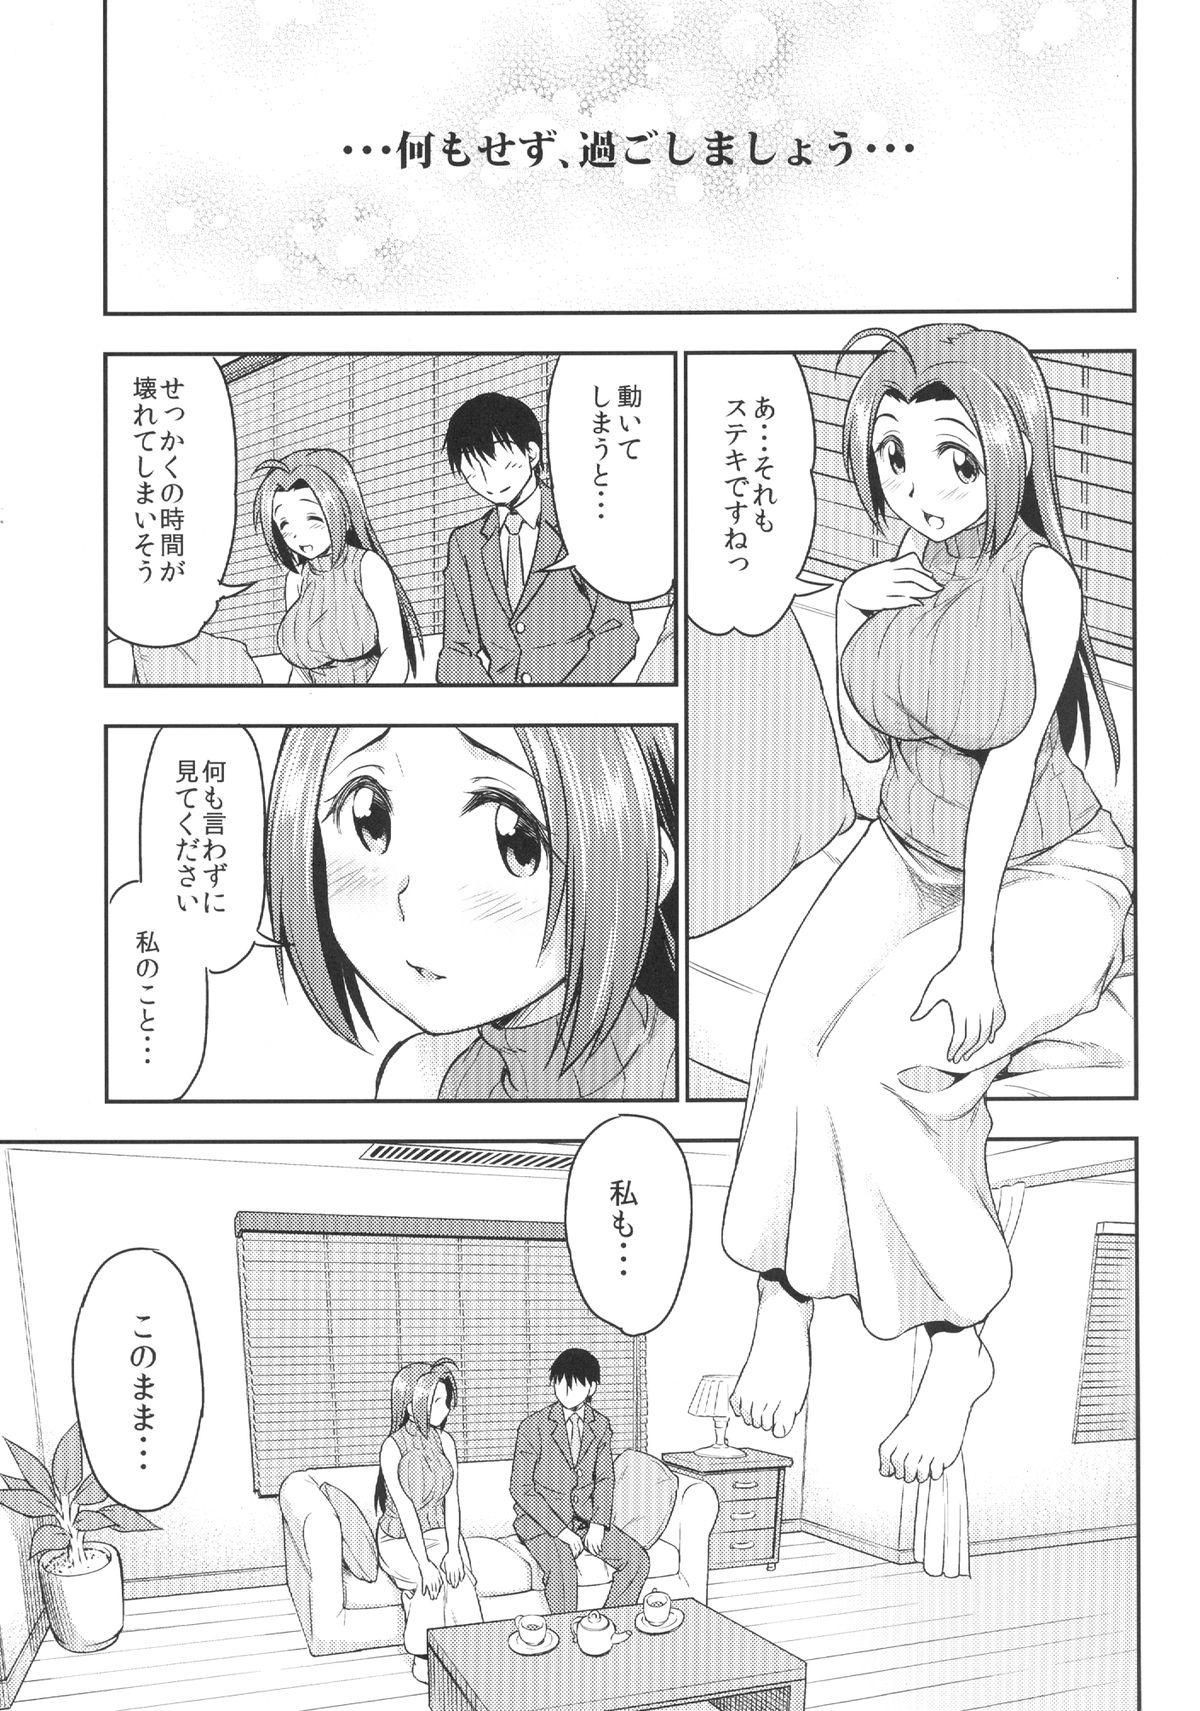 Tease EXTRA COMMUNICATION - The idolmaster Bigtits - Page 3